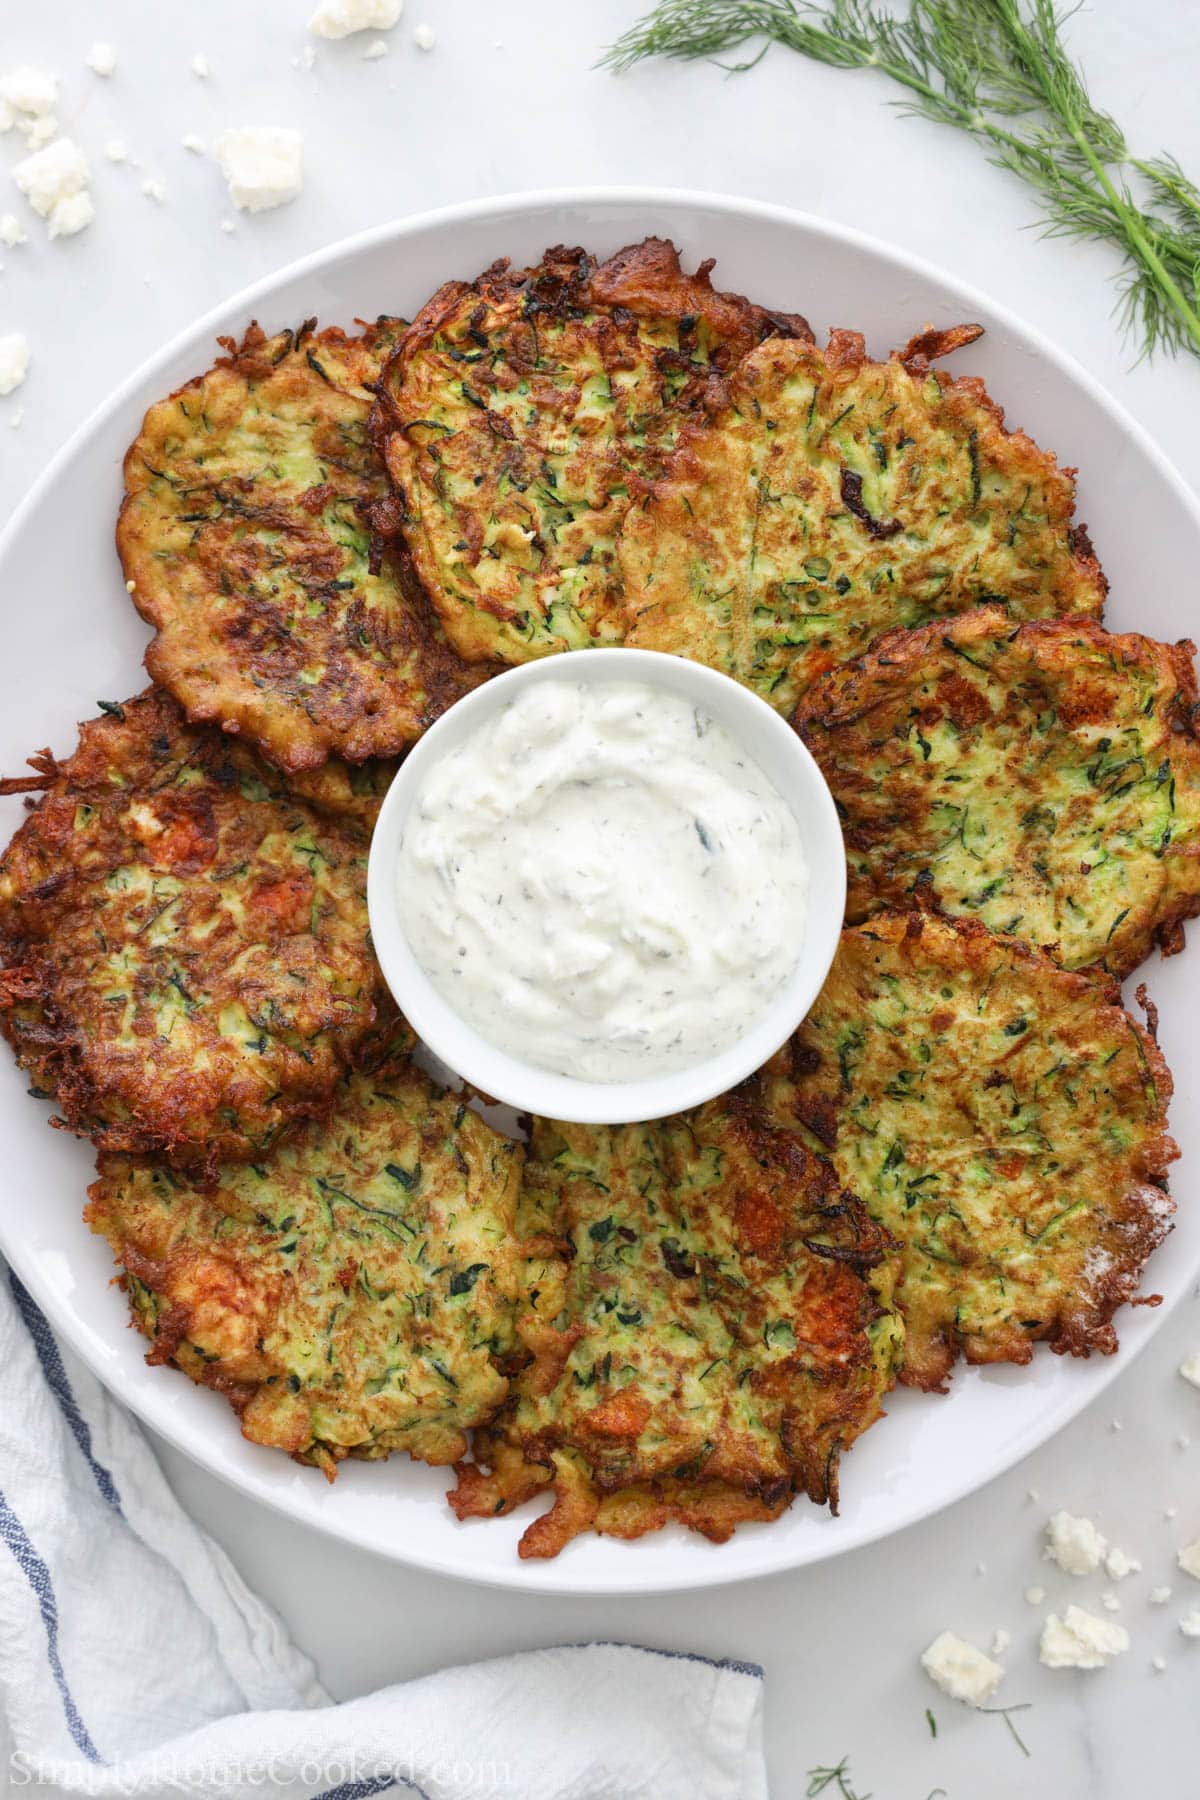 Zucchini are surrounded by a bowl of tzatziki sauce on a white plate